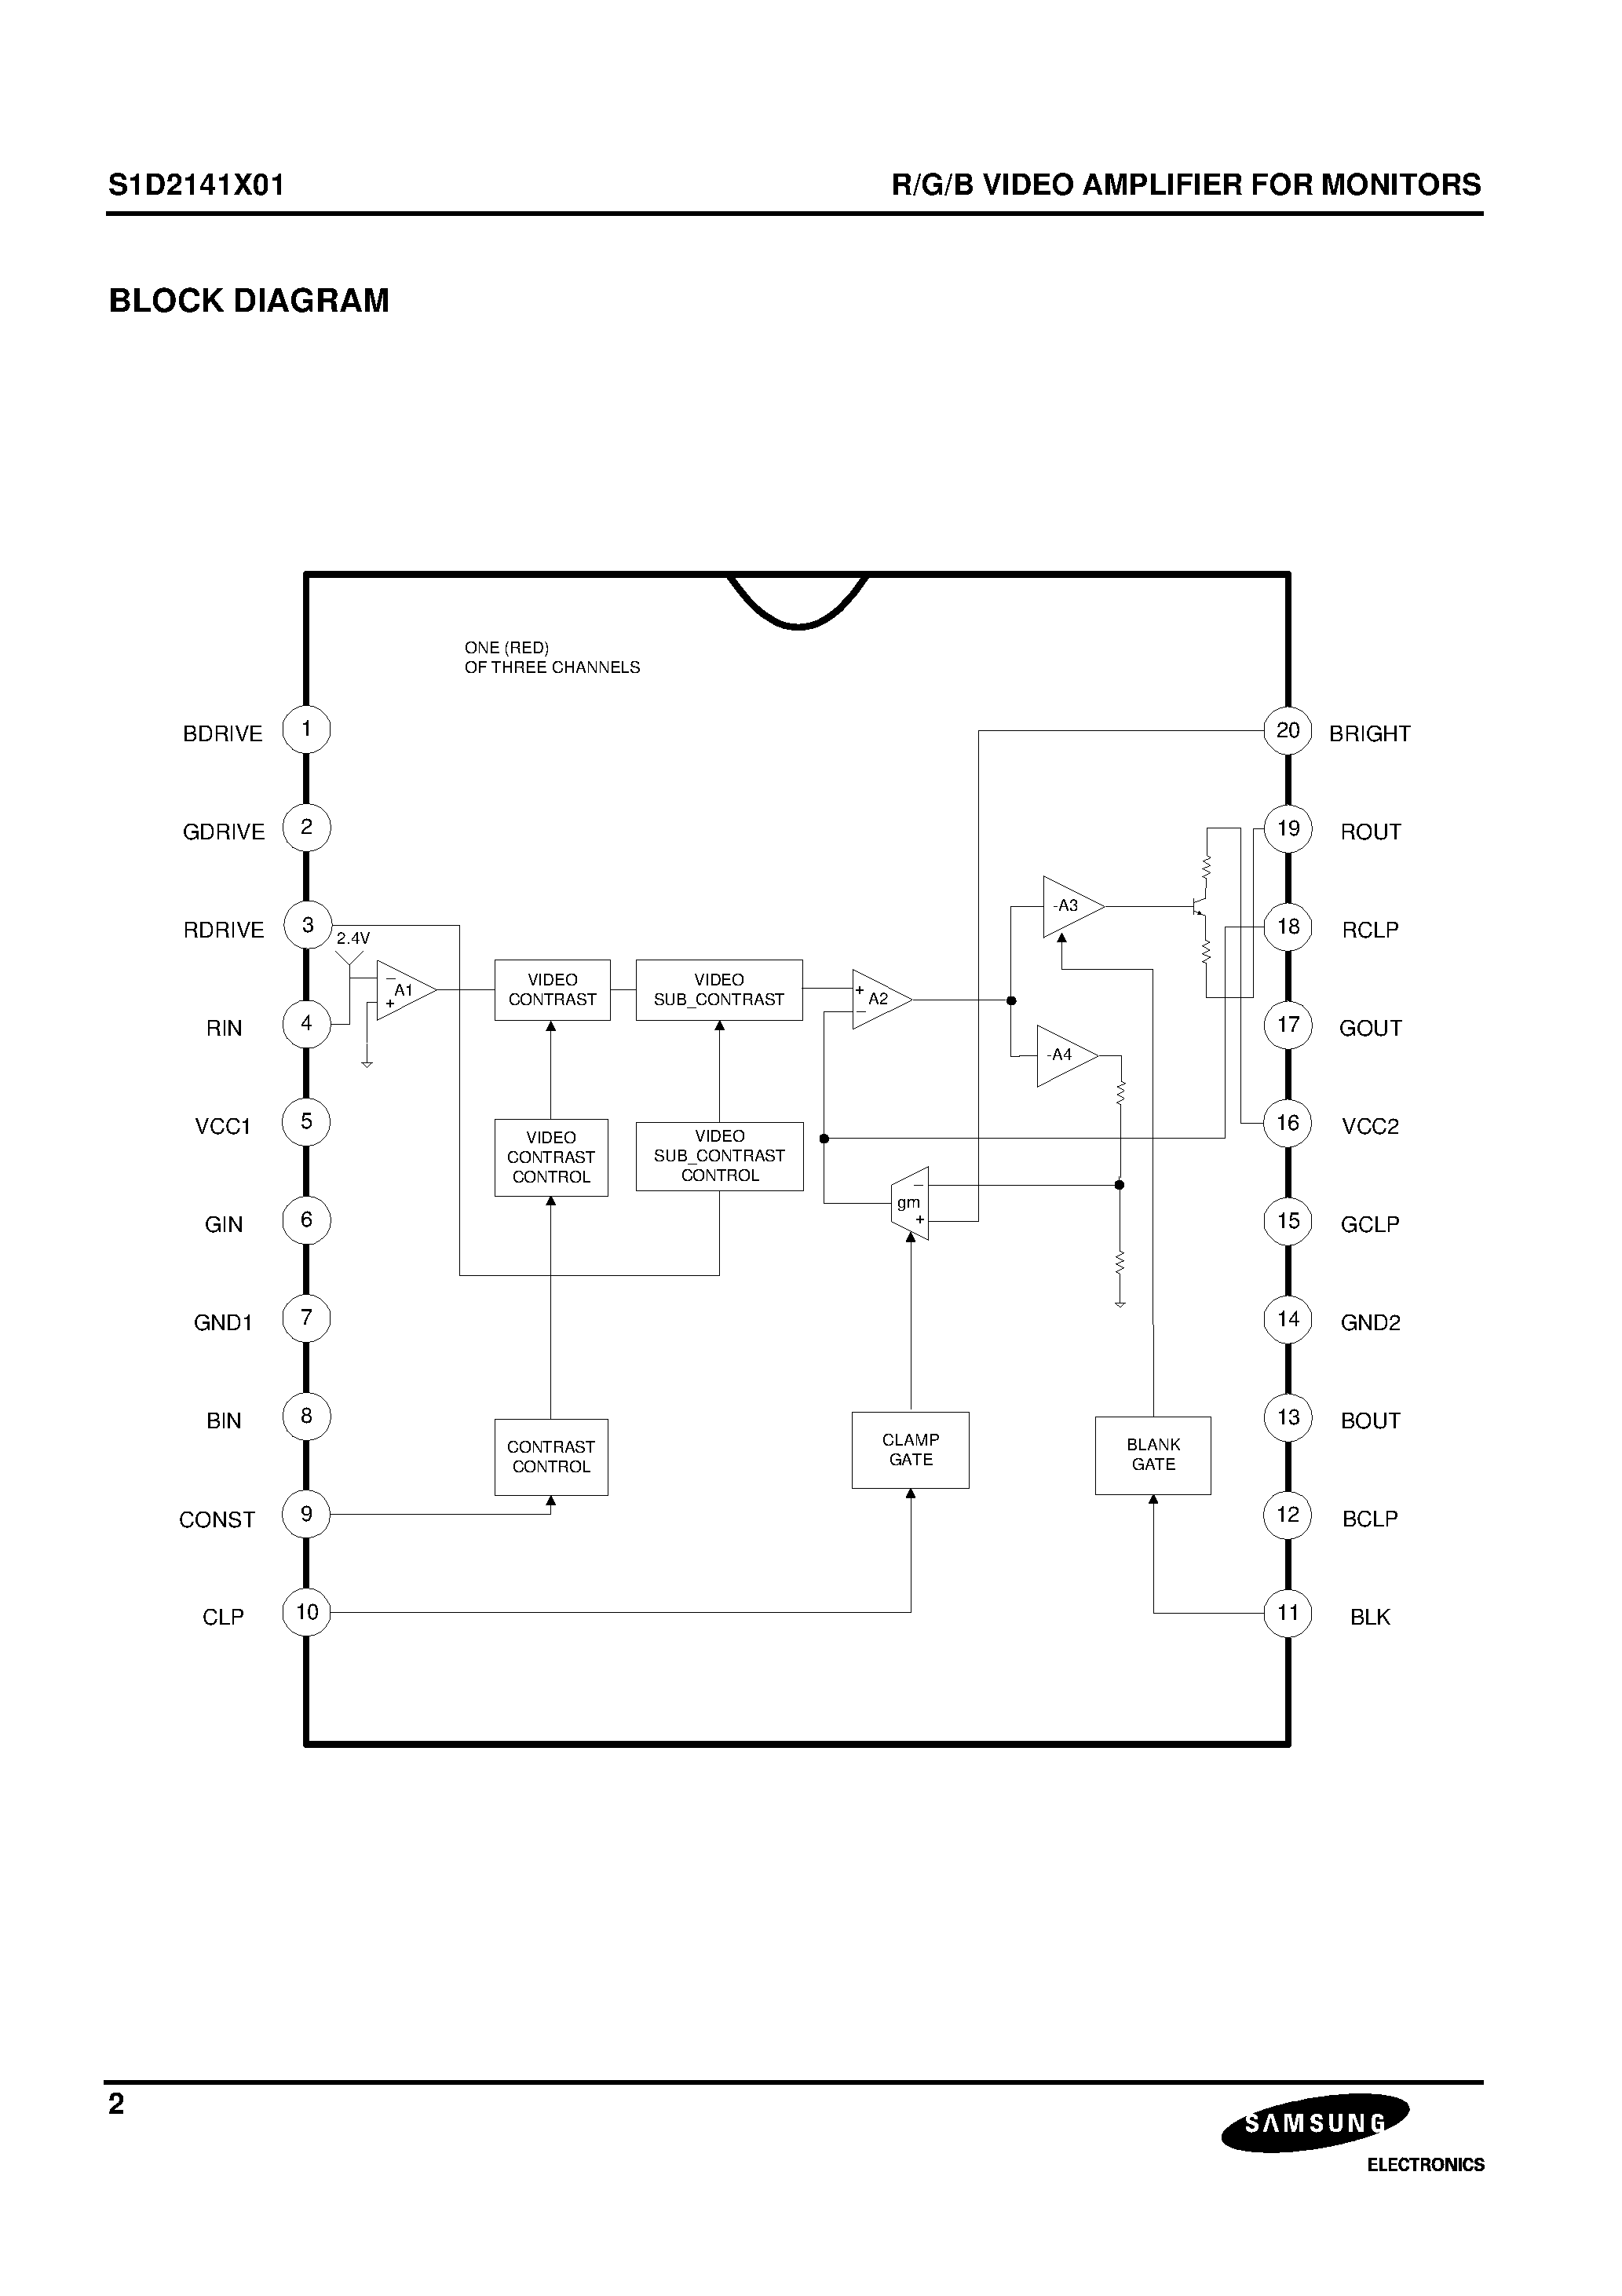 Datasheet S1D2141X01 - R/G/B VIDEO AMPLIFIER FOR MONITORS page 2